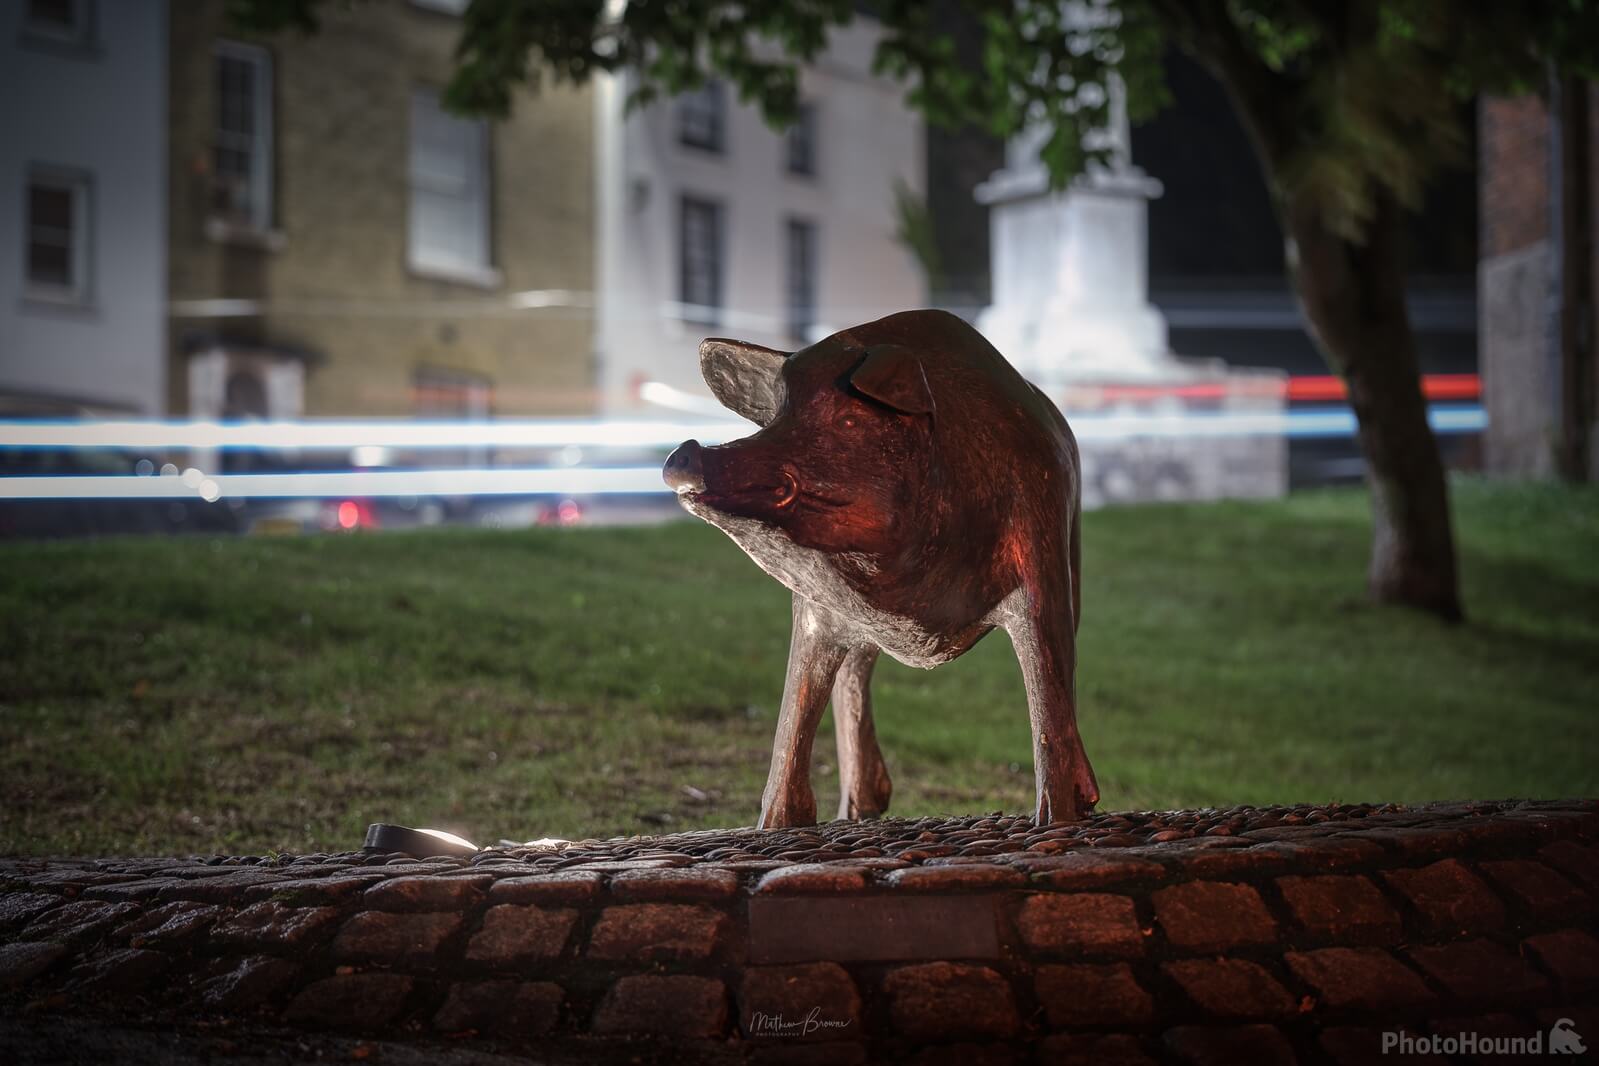 Image of The Hampshire Hog by Mathew Browne